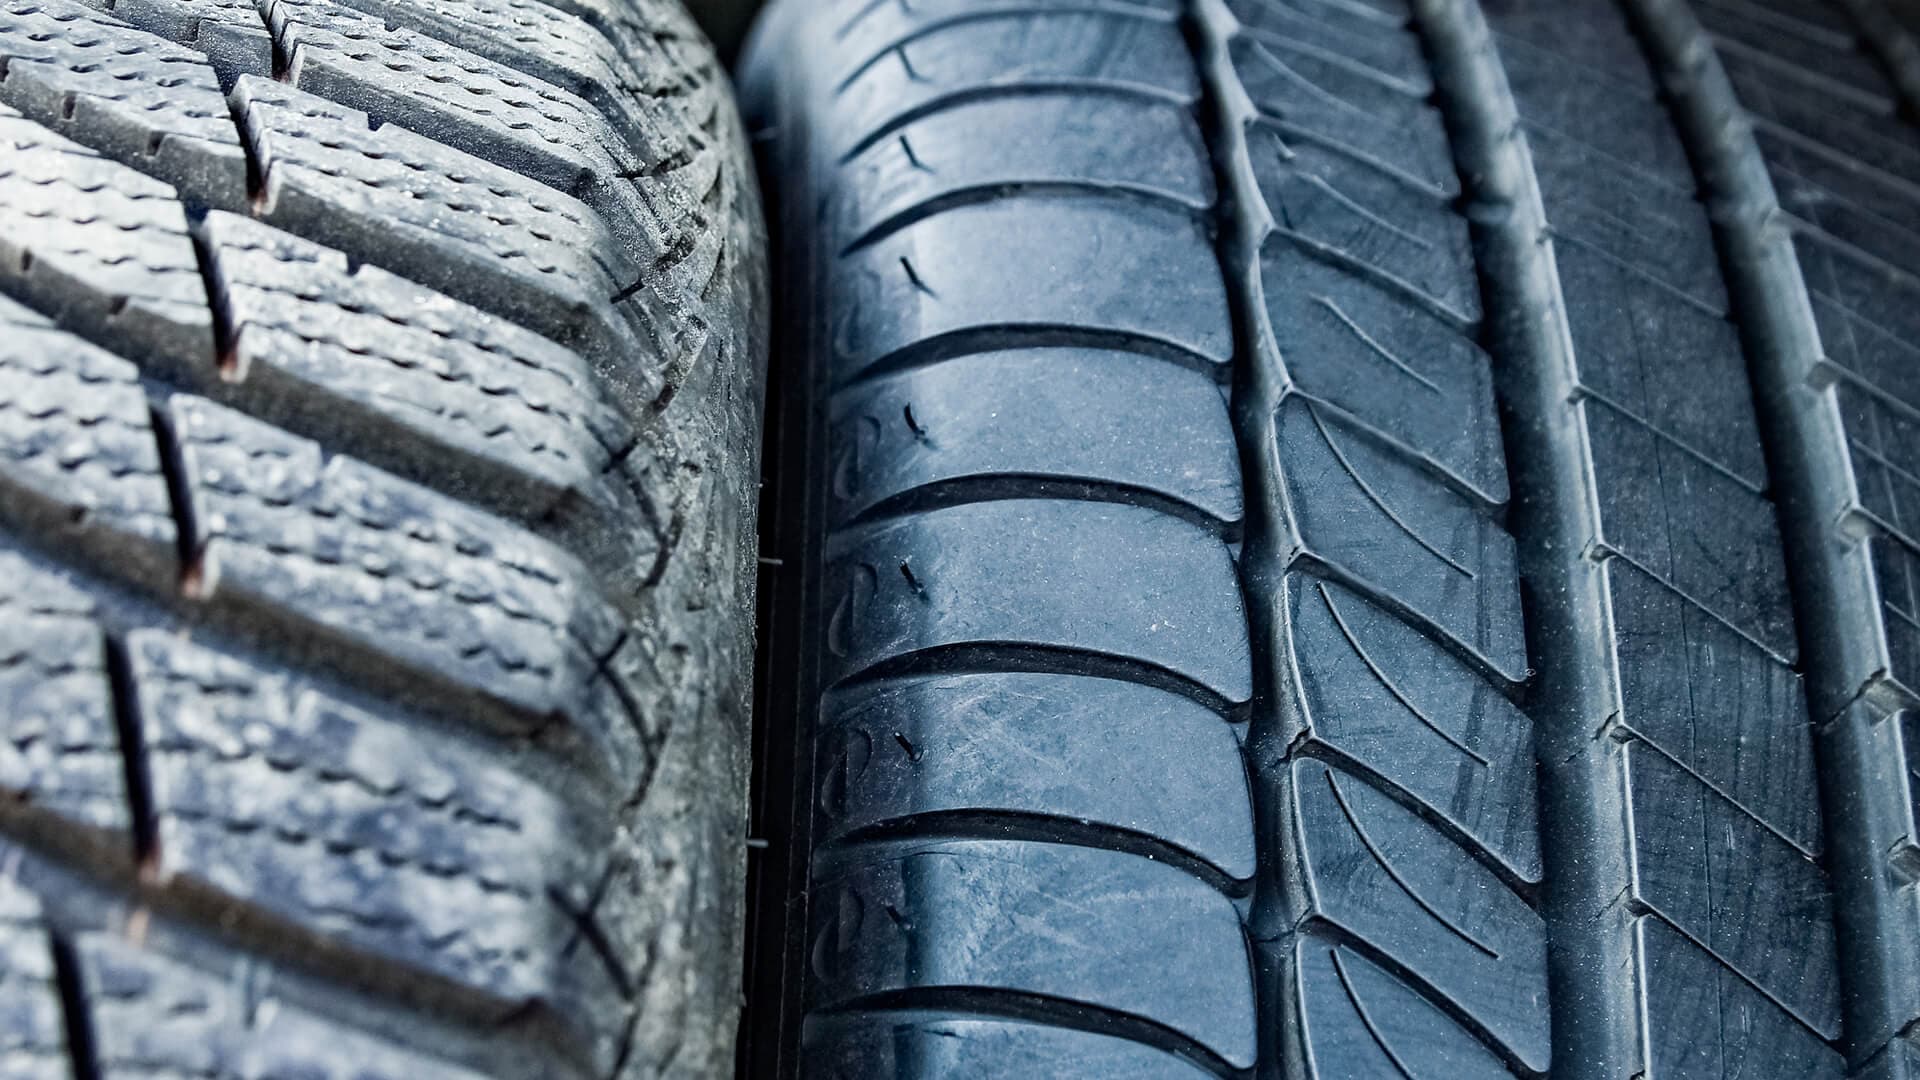 When Looking For New Tires, Here’s Where We Recommend